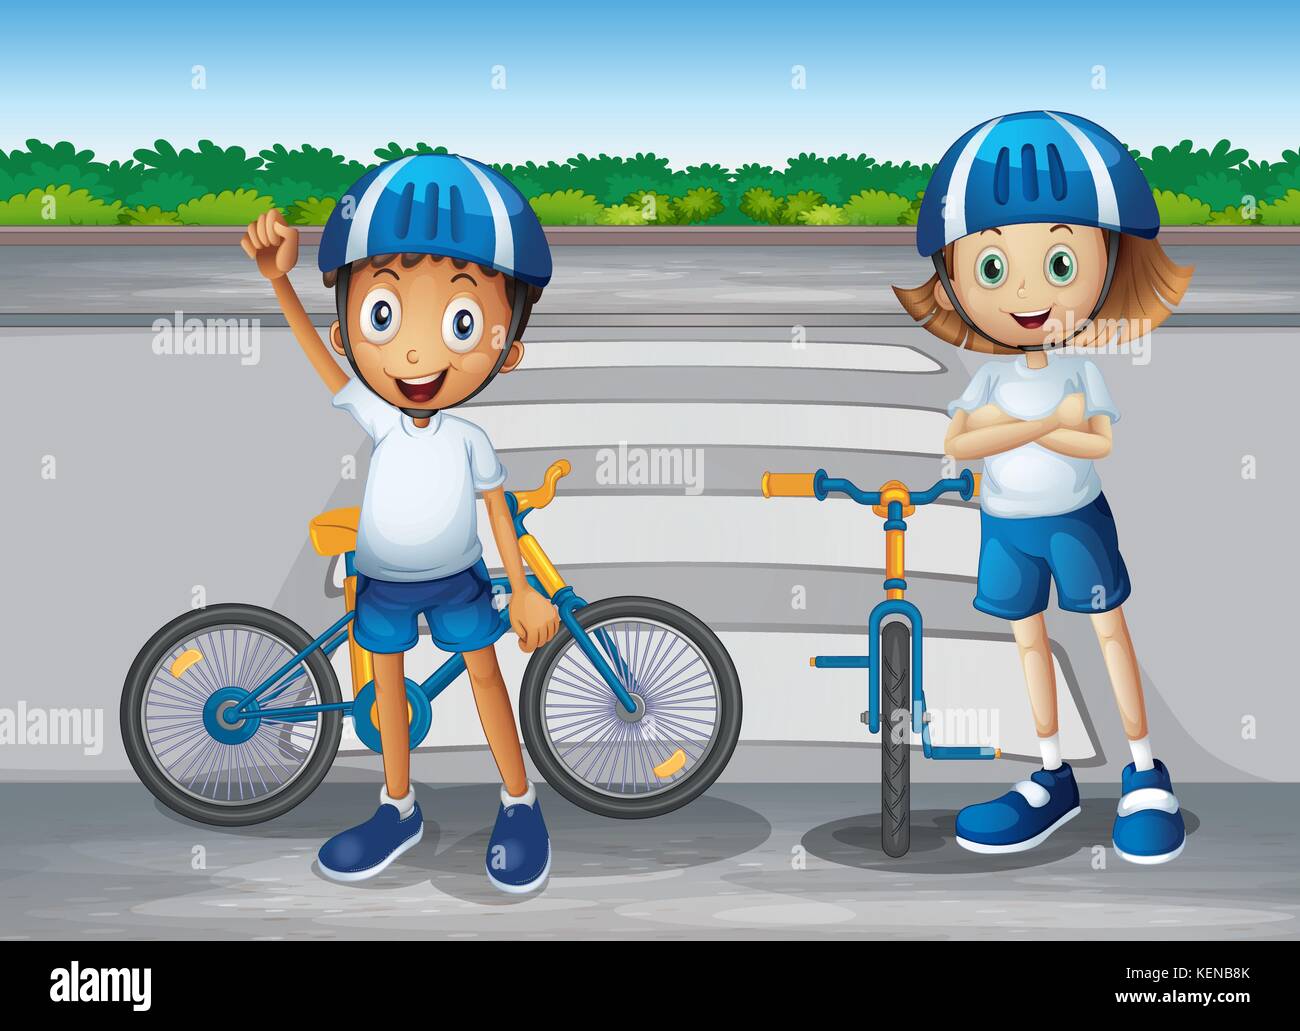 Illustration of a girl and a boy with their bikes standing near the pedestrian lane Stock Vector